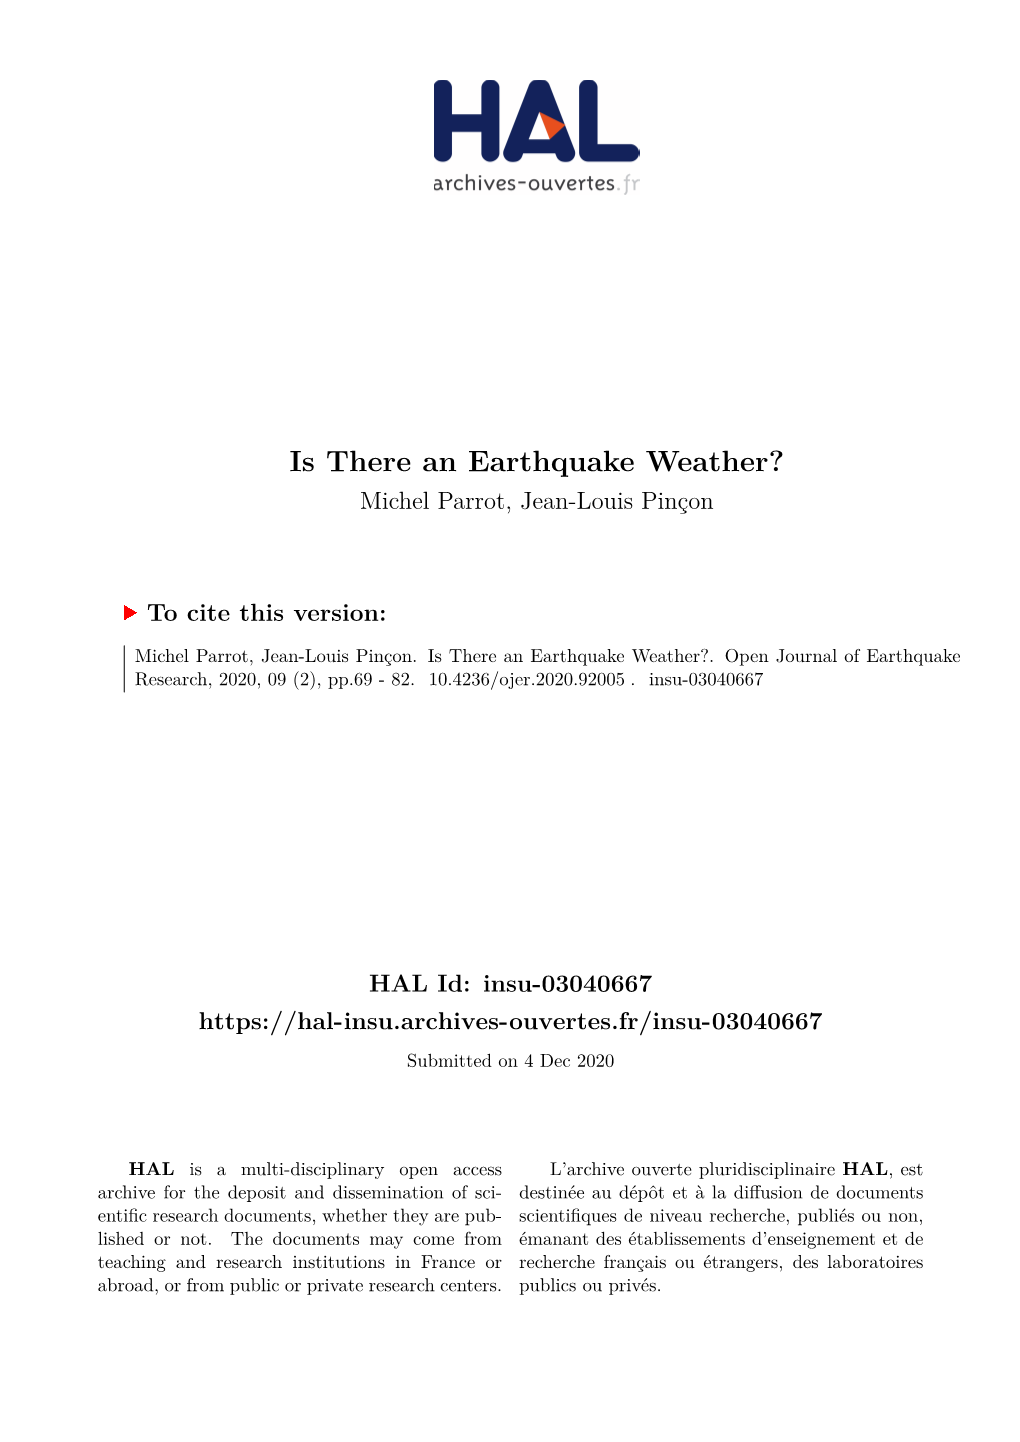 Is There an Earthquake Weather? Michel Parrot, Jean-Louis Pinçon